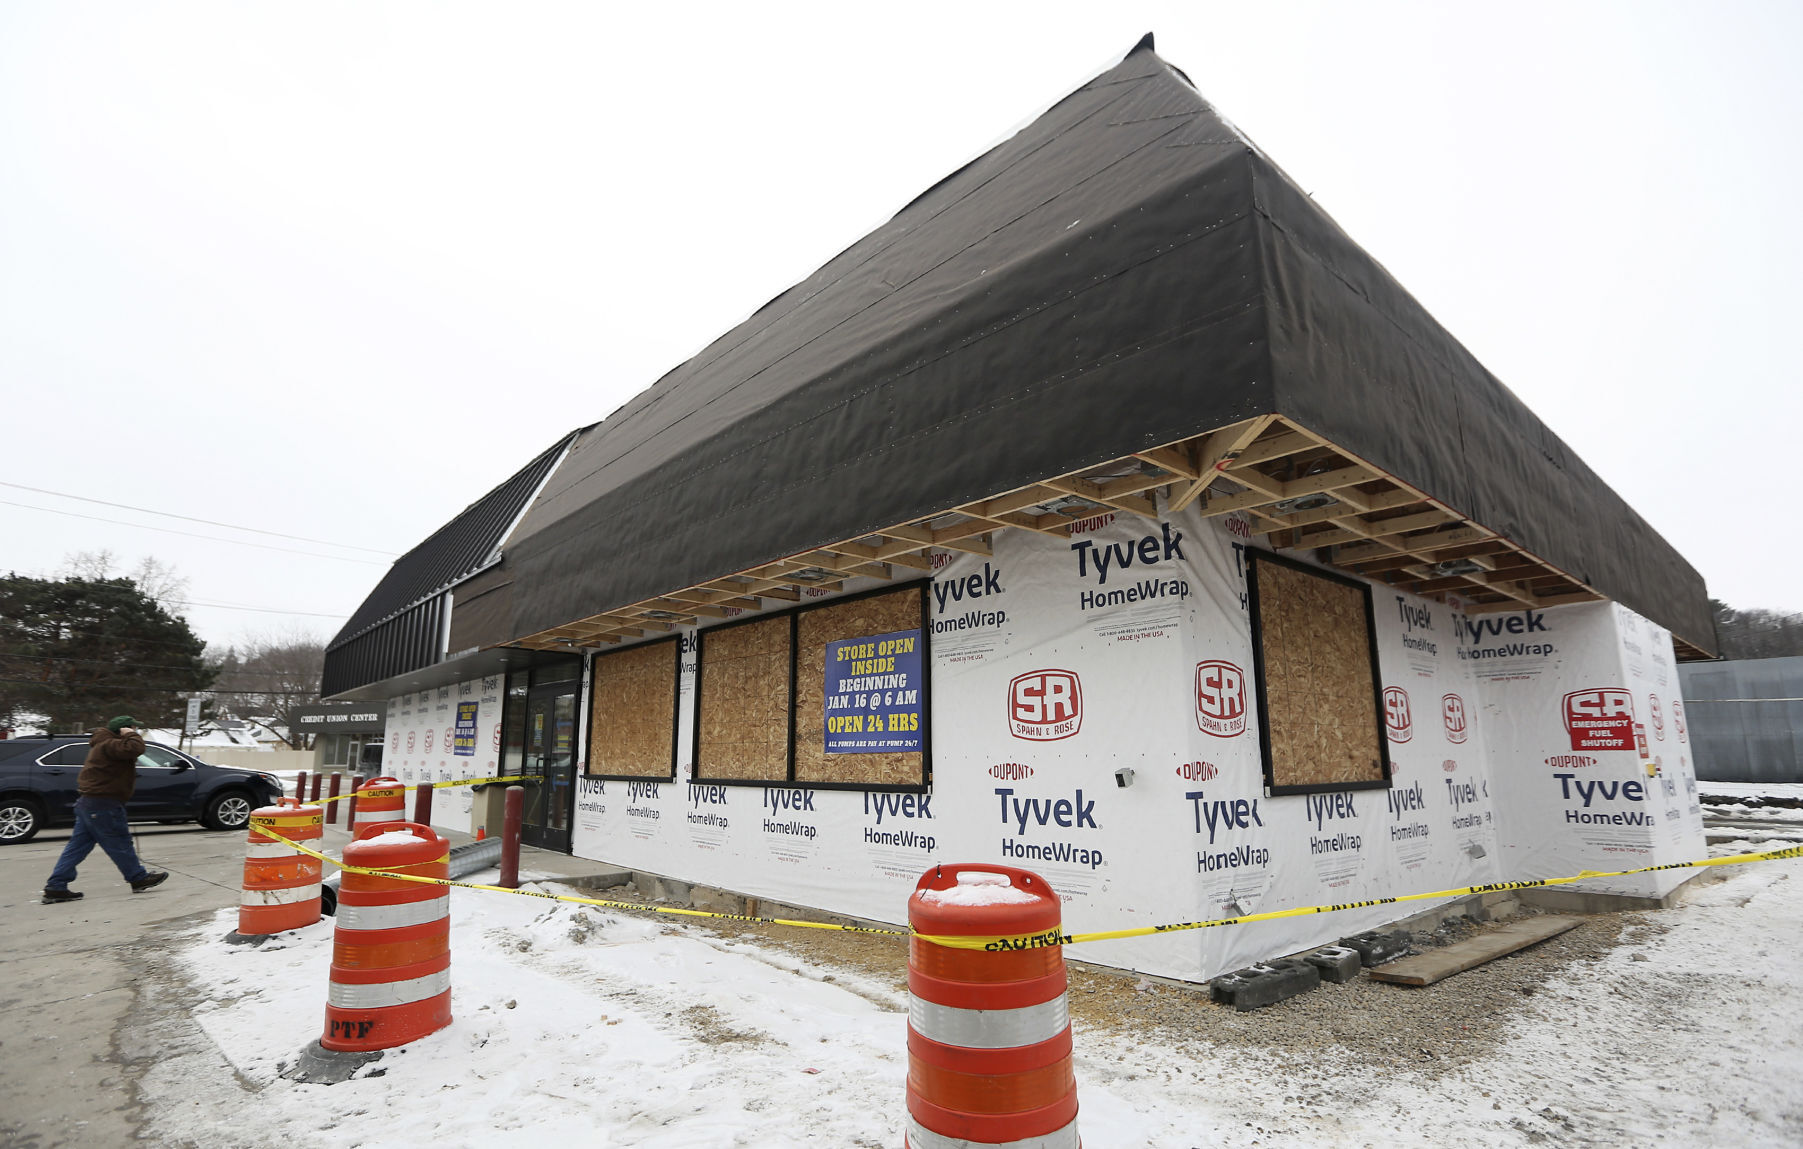 Family Mart in Dubuque on Monday, Jan. 25, 2021. The store is open while undergoing a renovation.  PHOTO CREDIT: NICKI KOHL